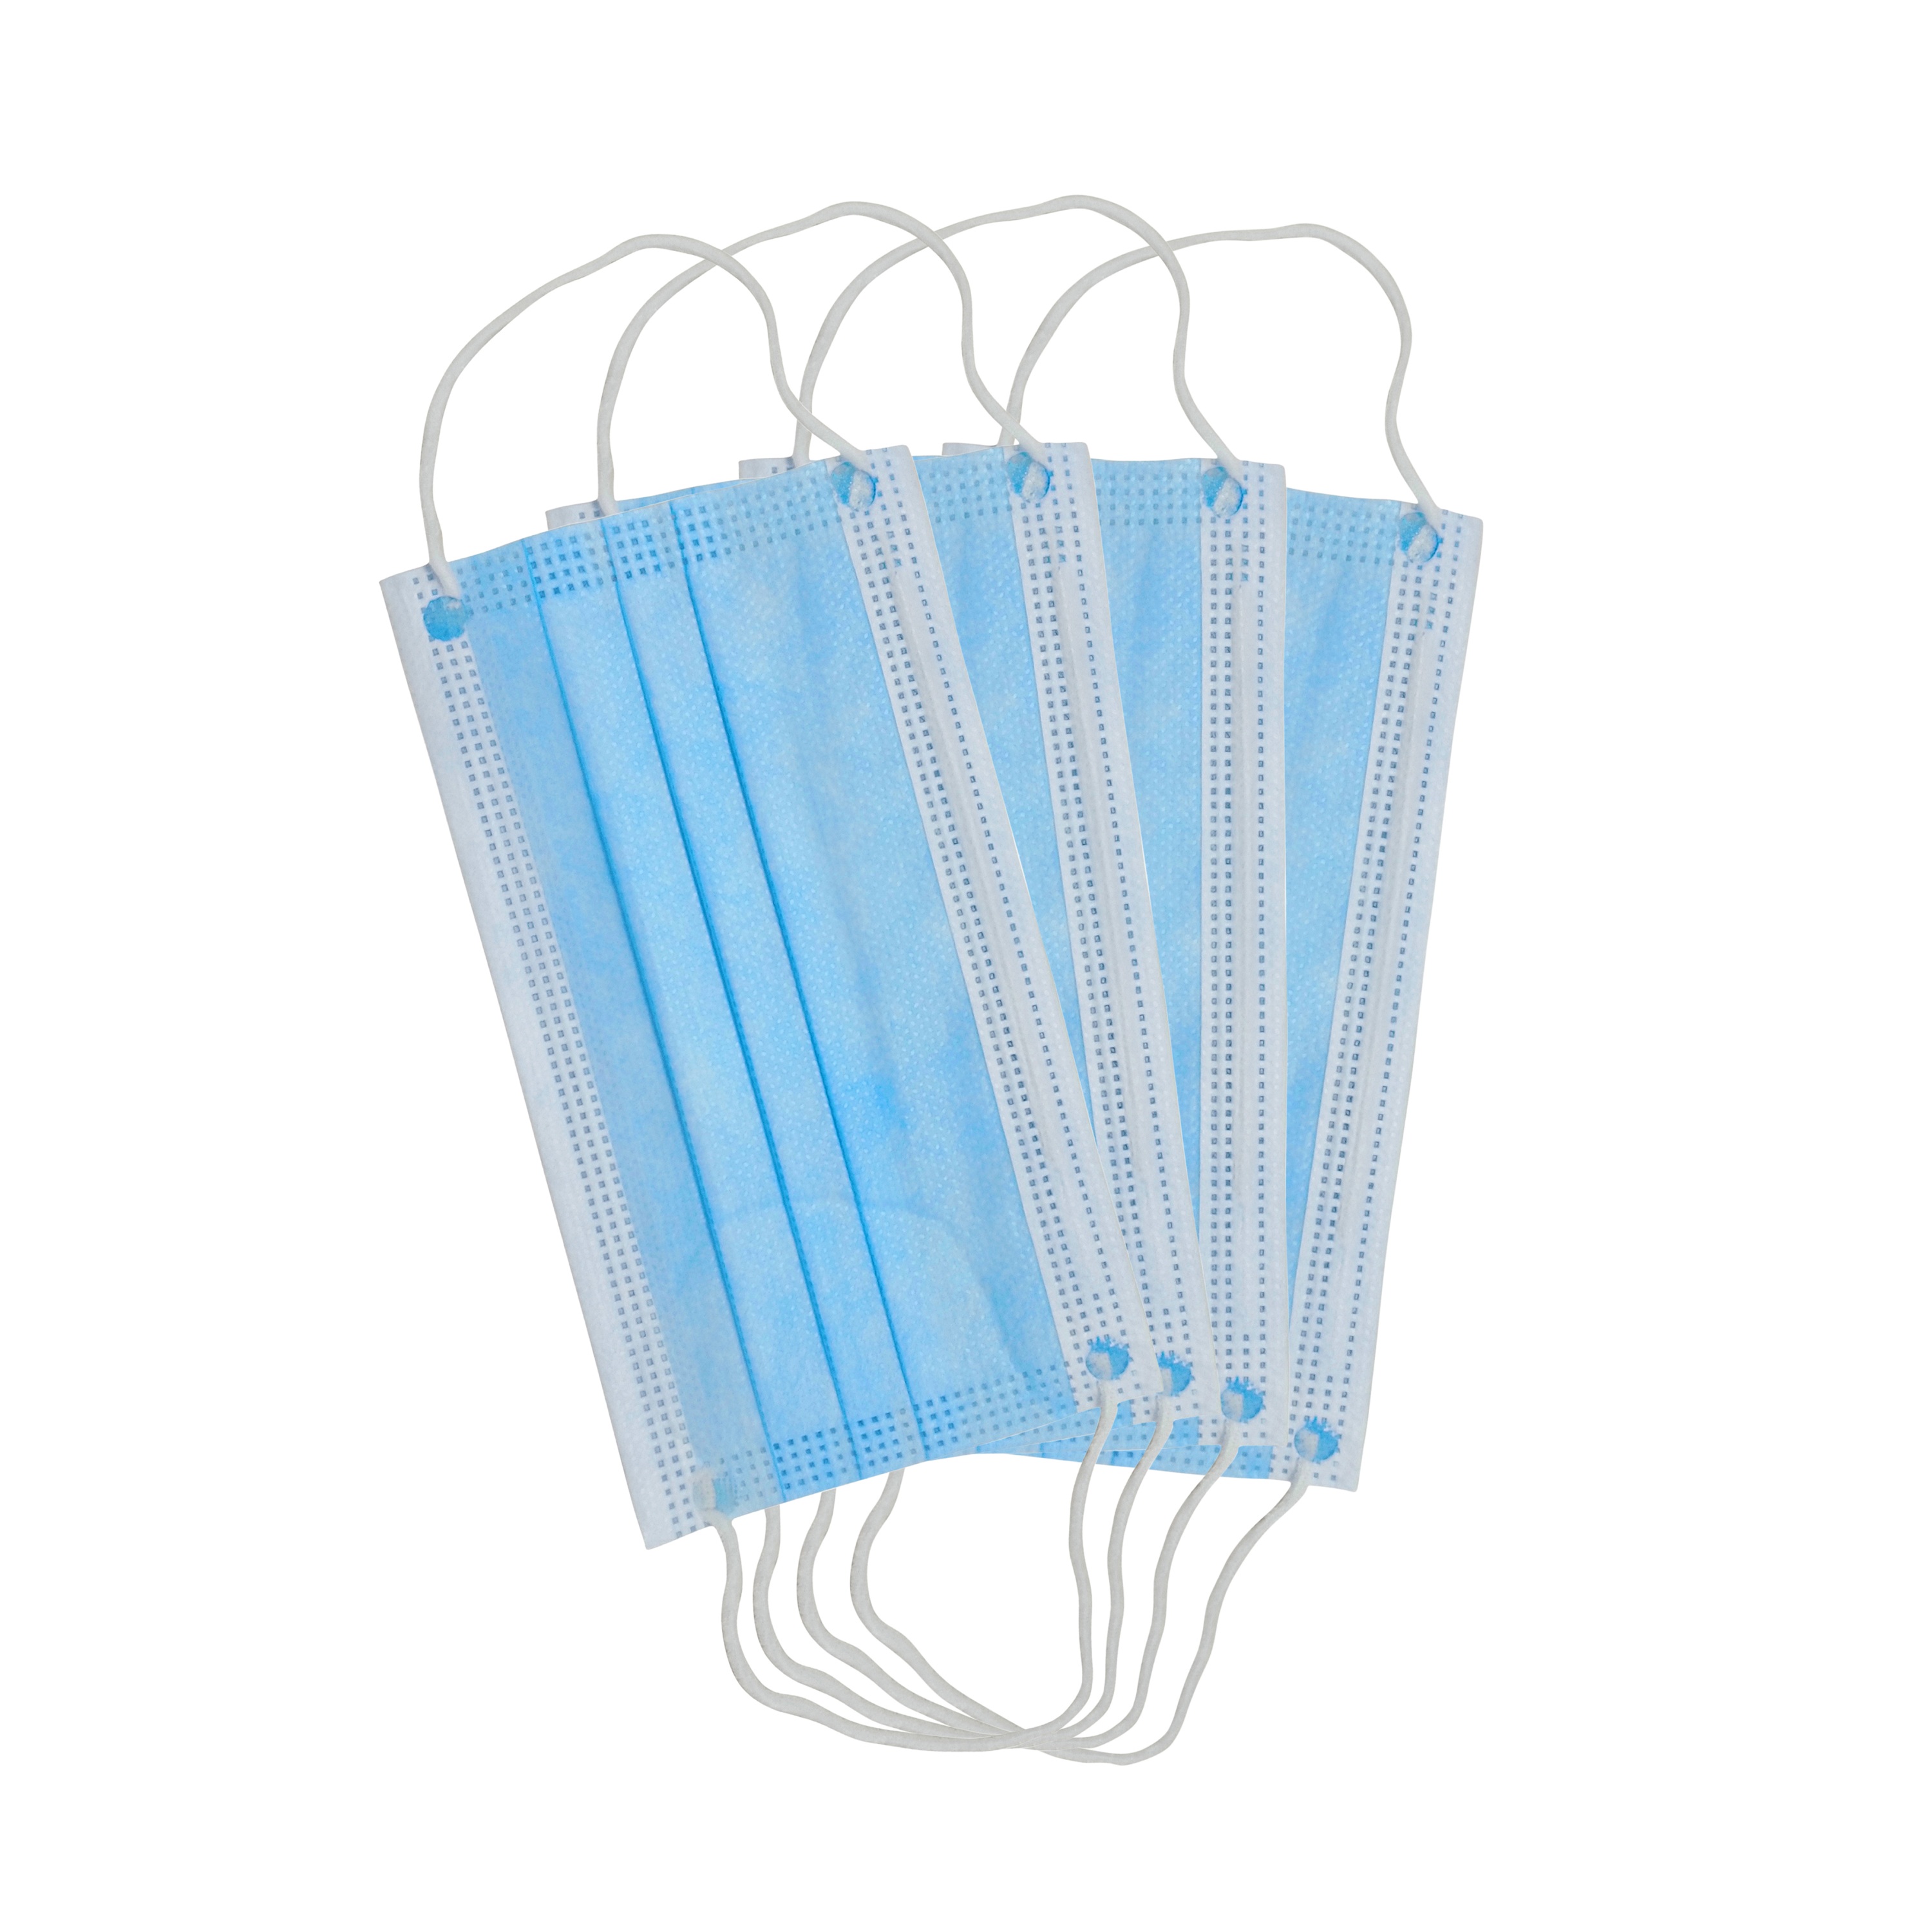 Disposable Medical Anti-Virus Safety Protective Fa